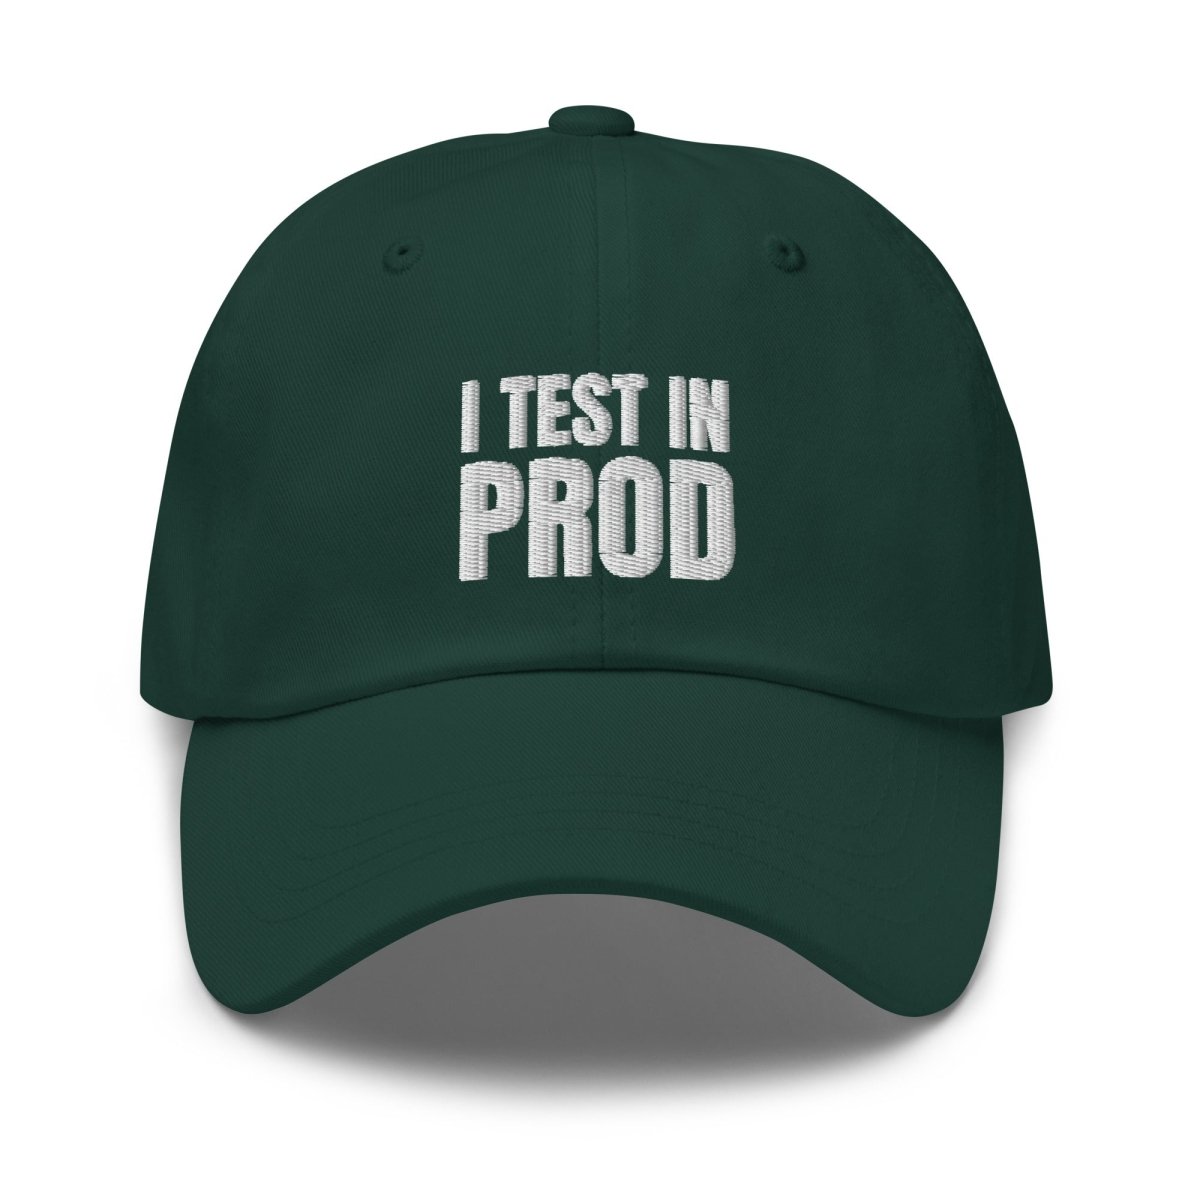 I Test in Prod Embroidered Cap - Spruce - AI Store